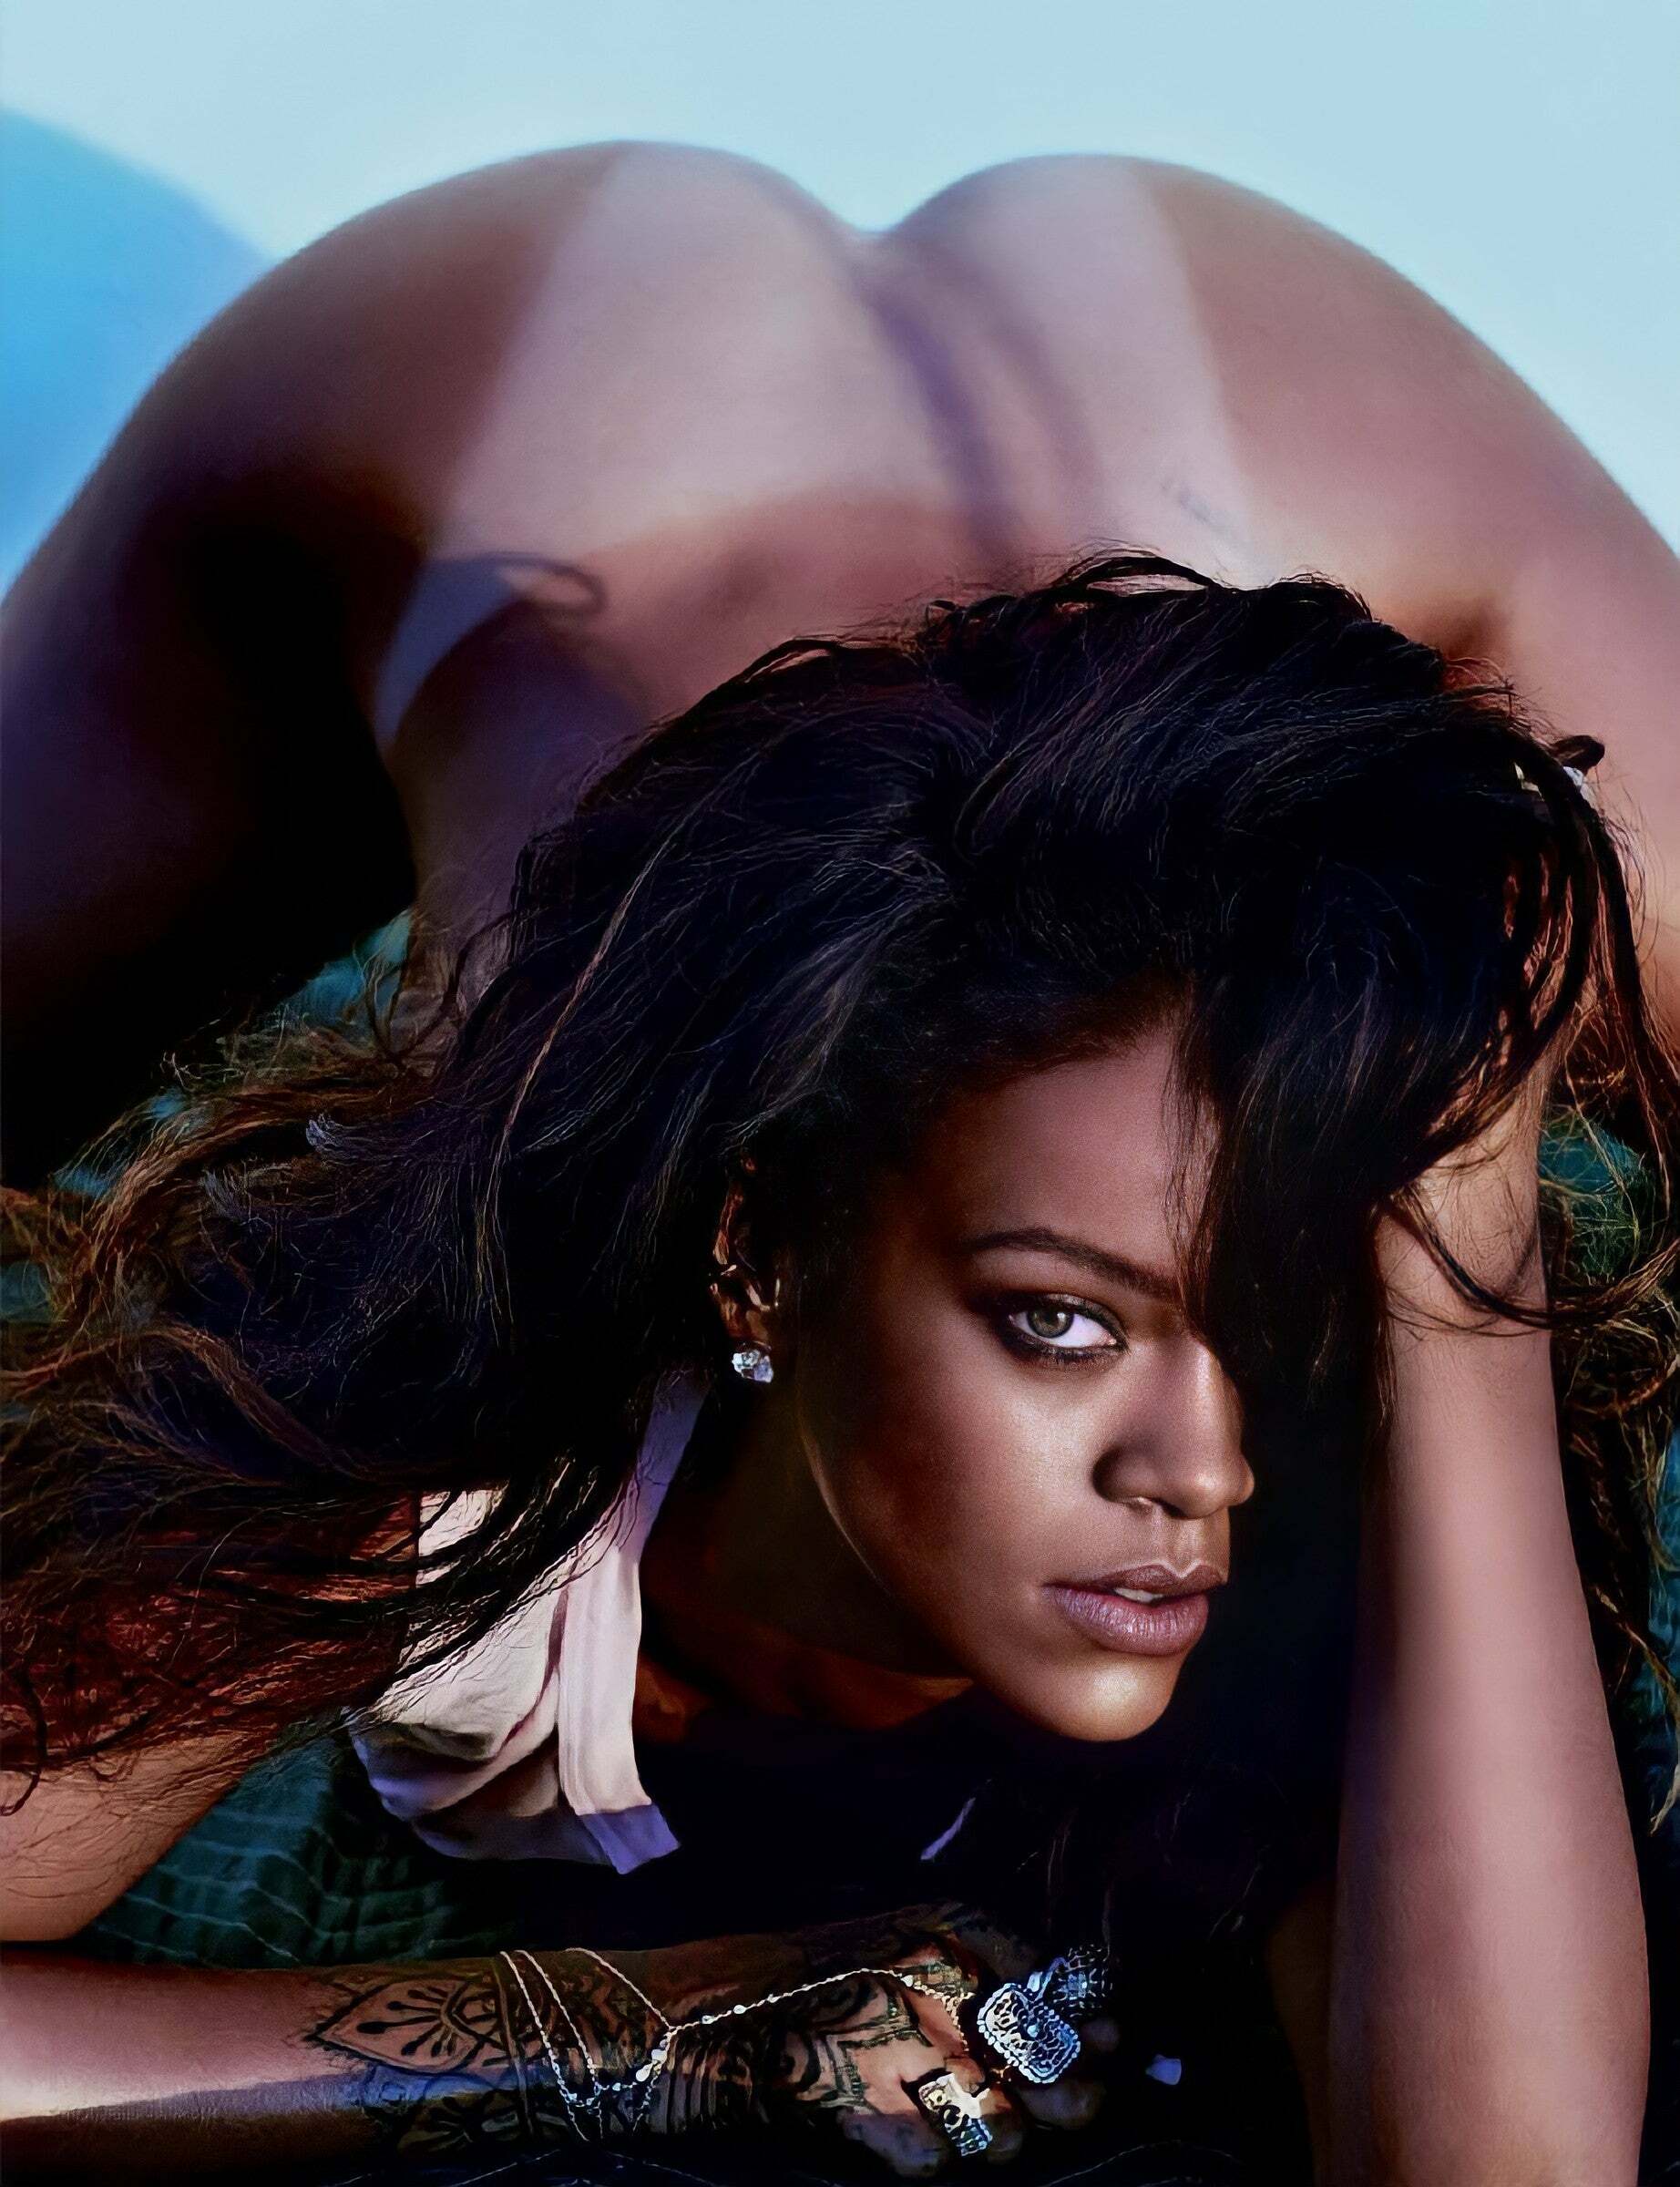 The photographer probably saved the reverse angle of this Rihanna pose for himself